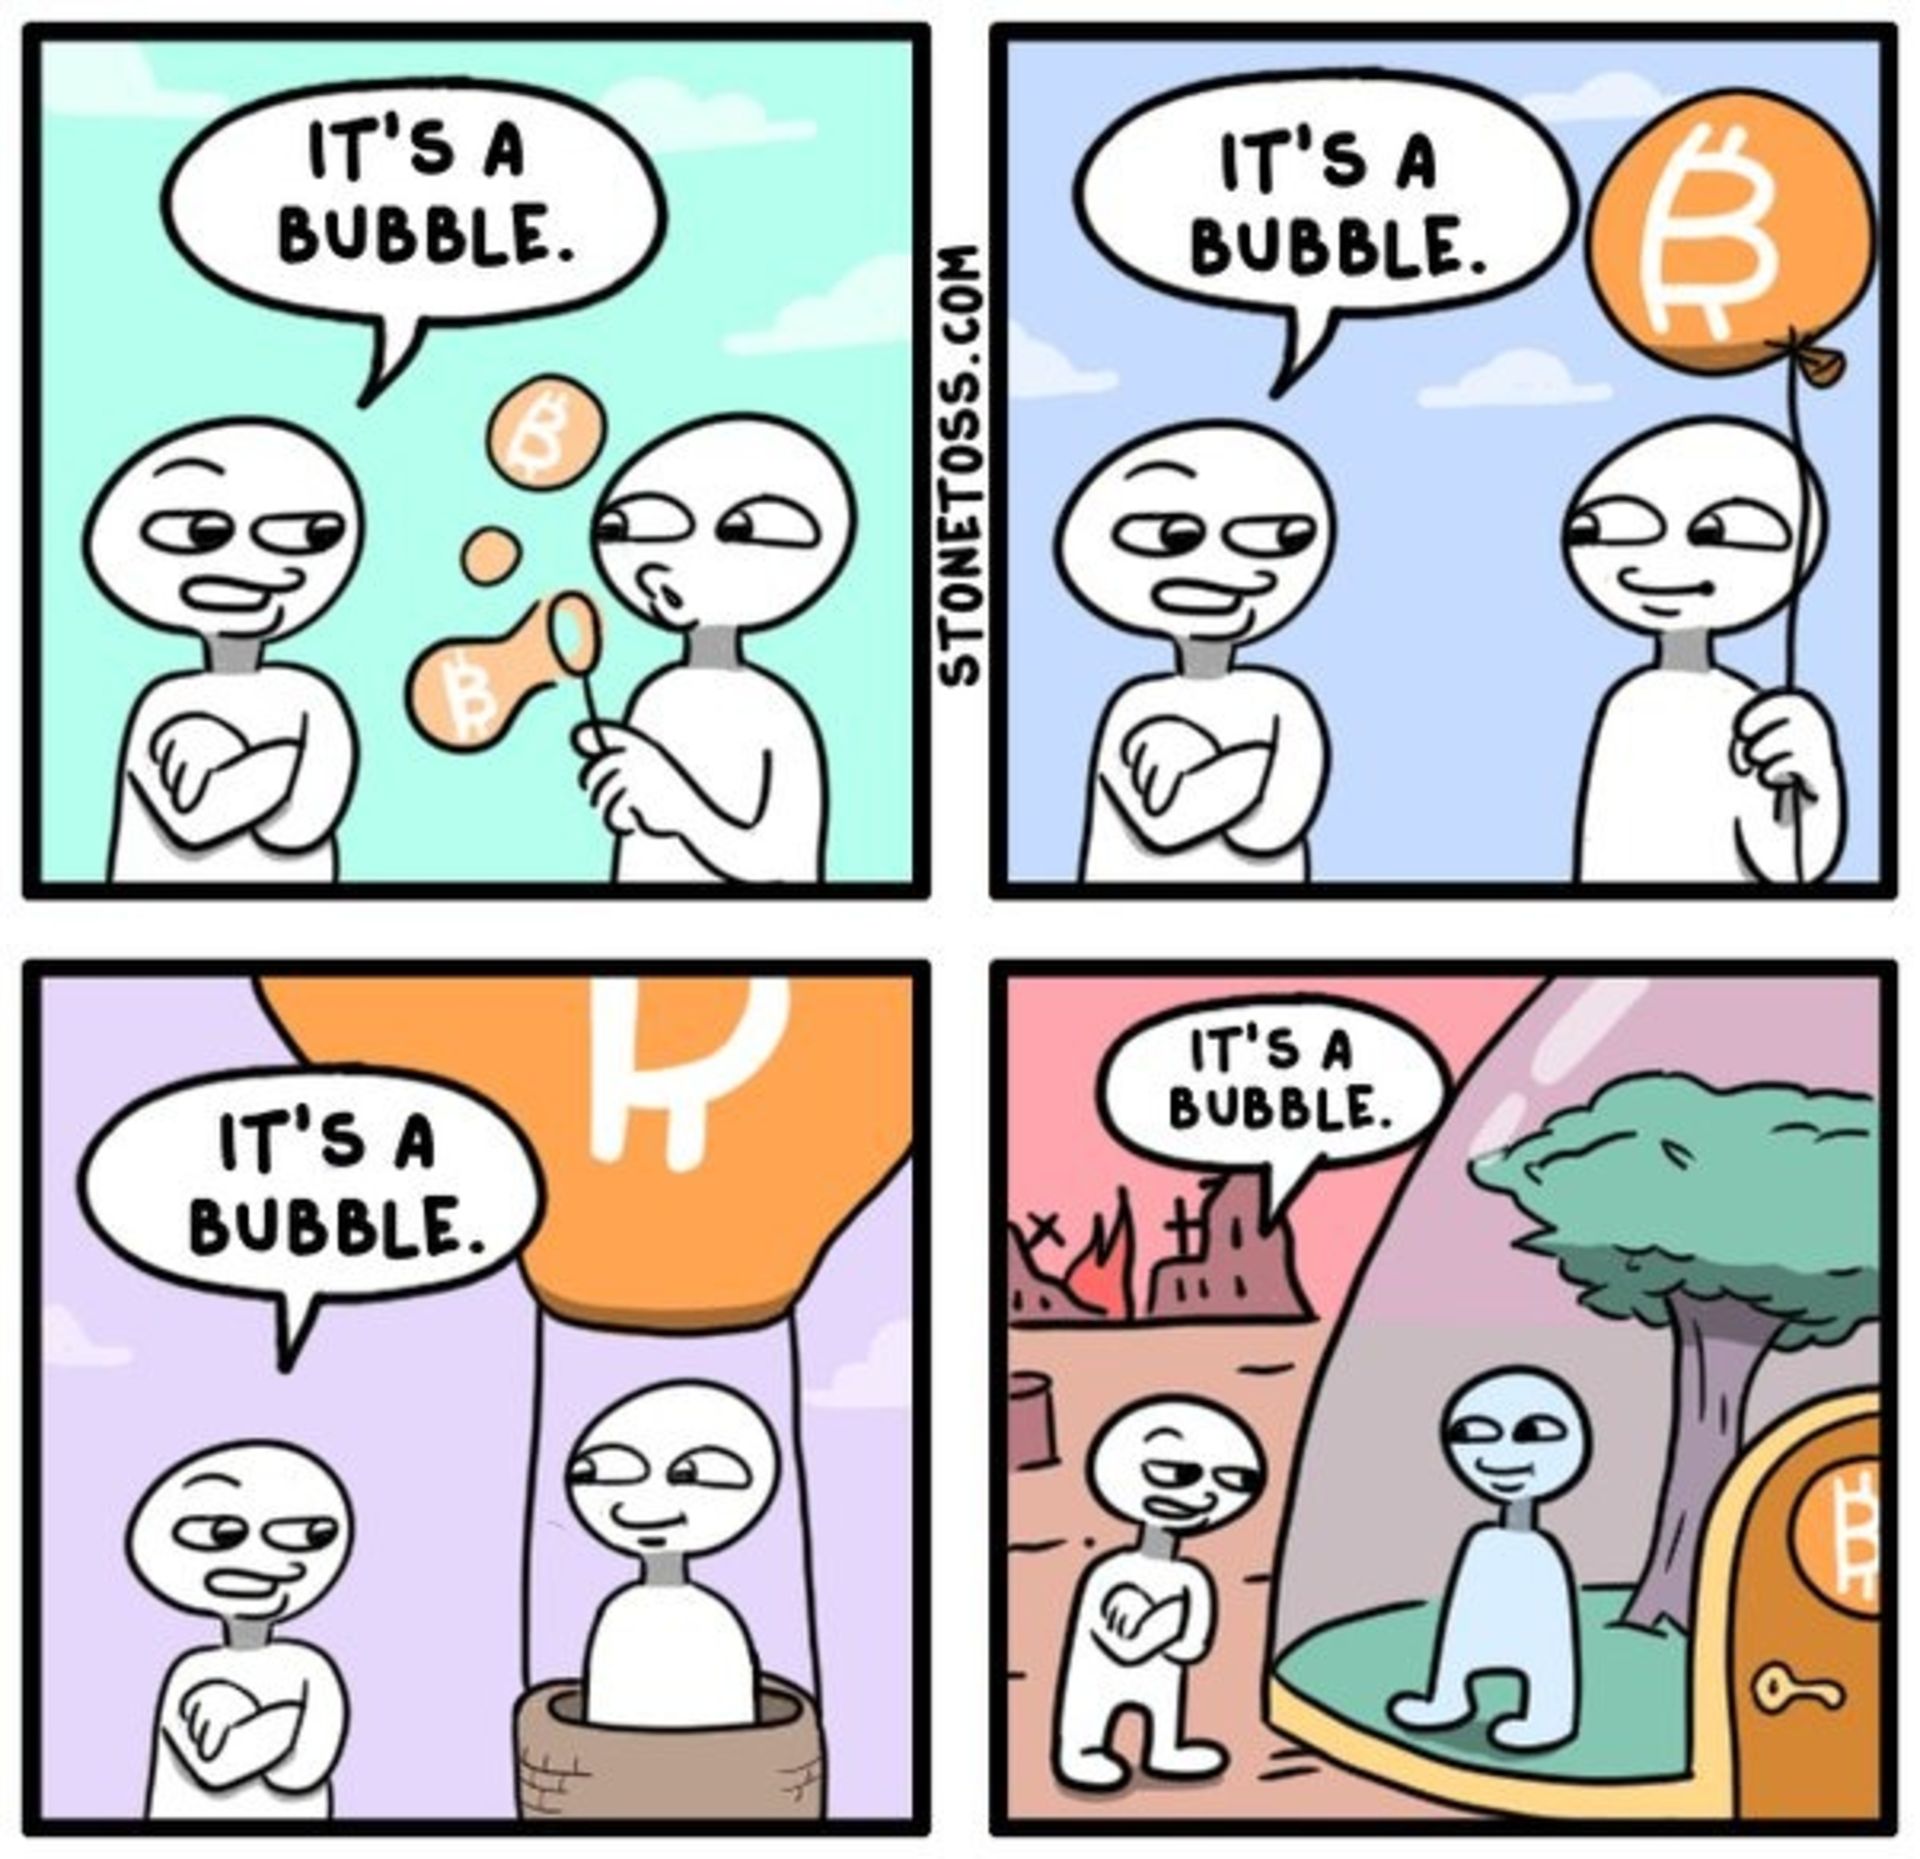 bitcoin is a bubble